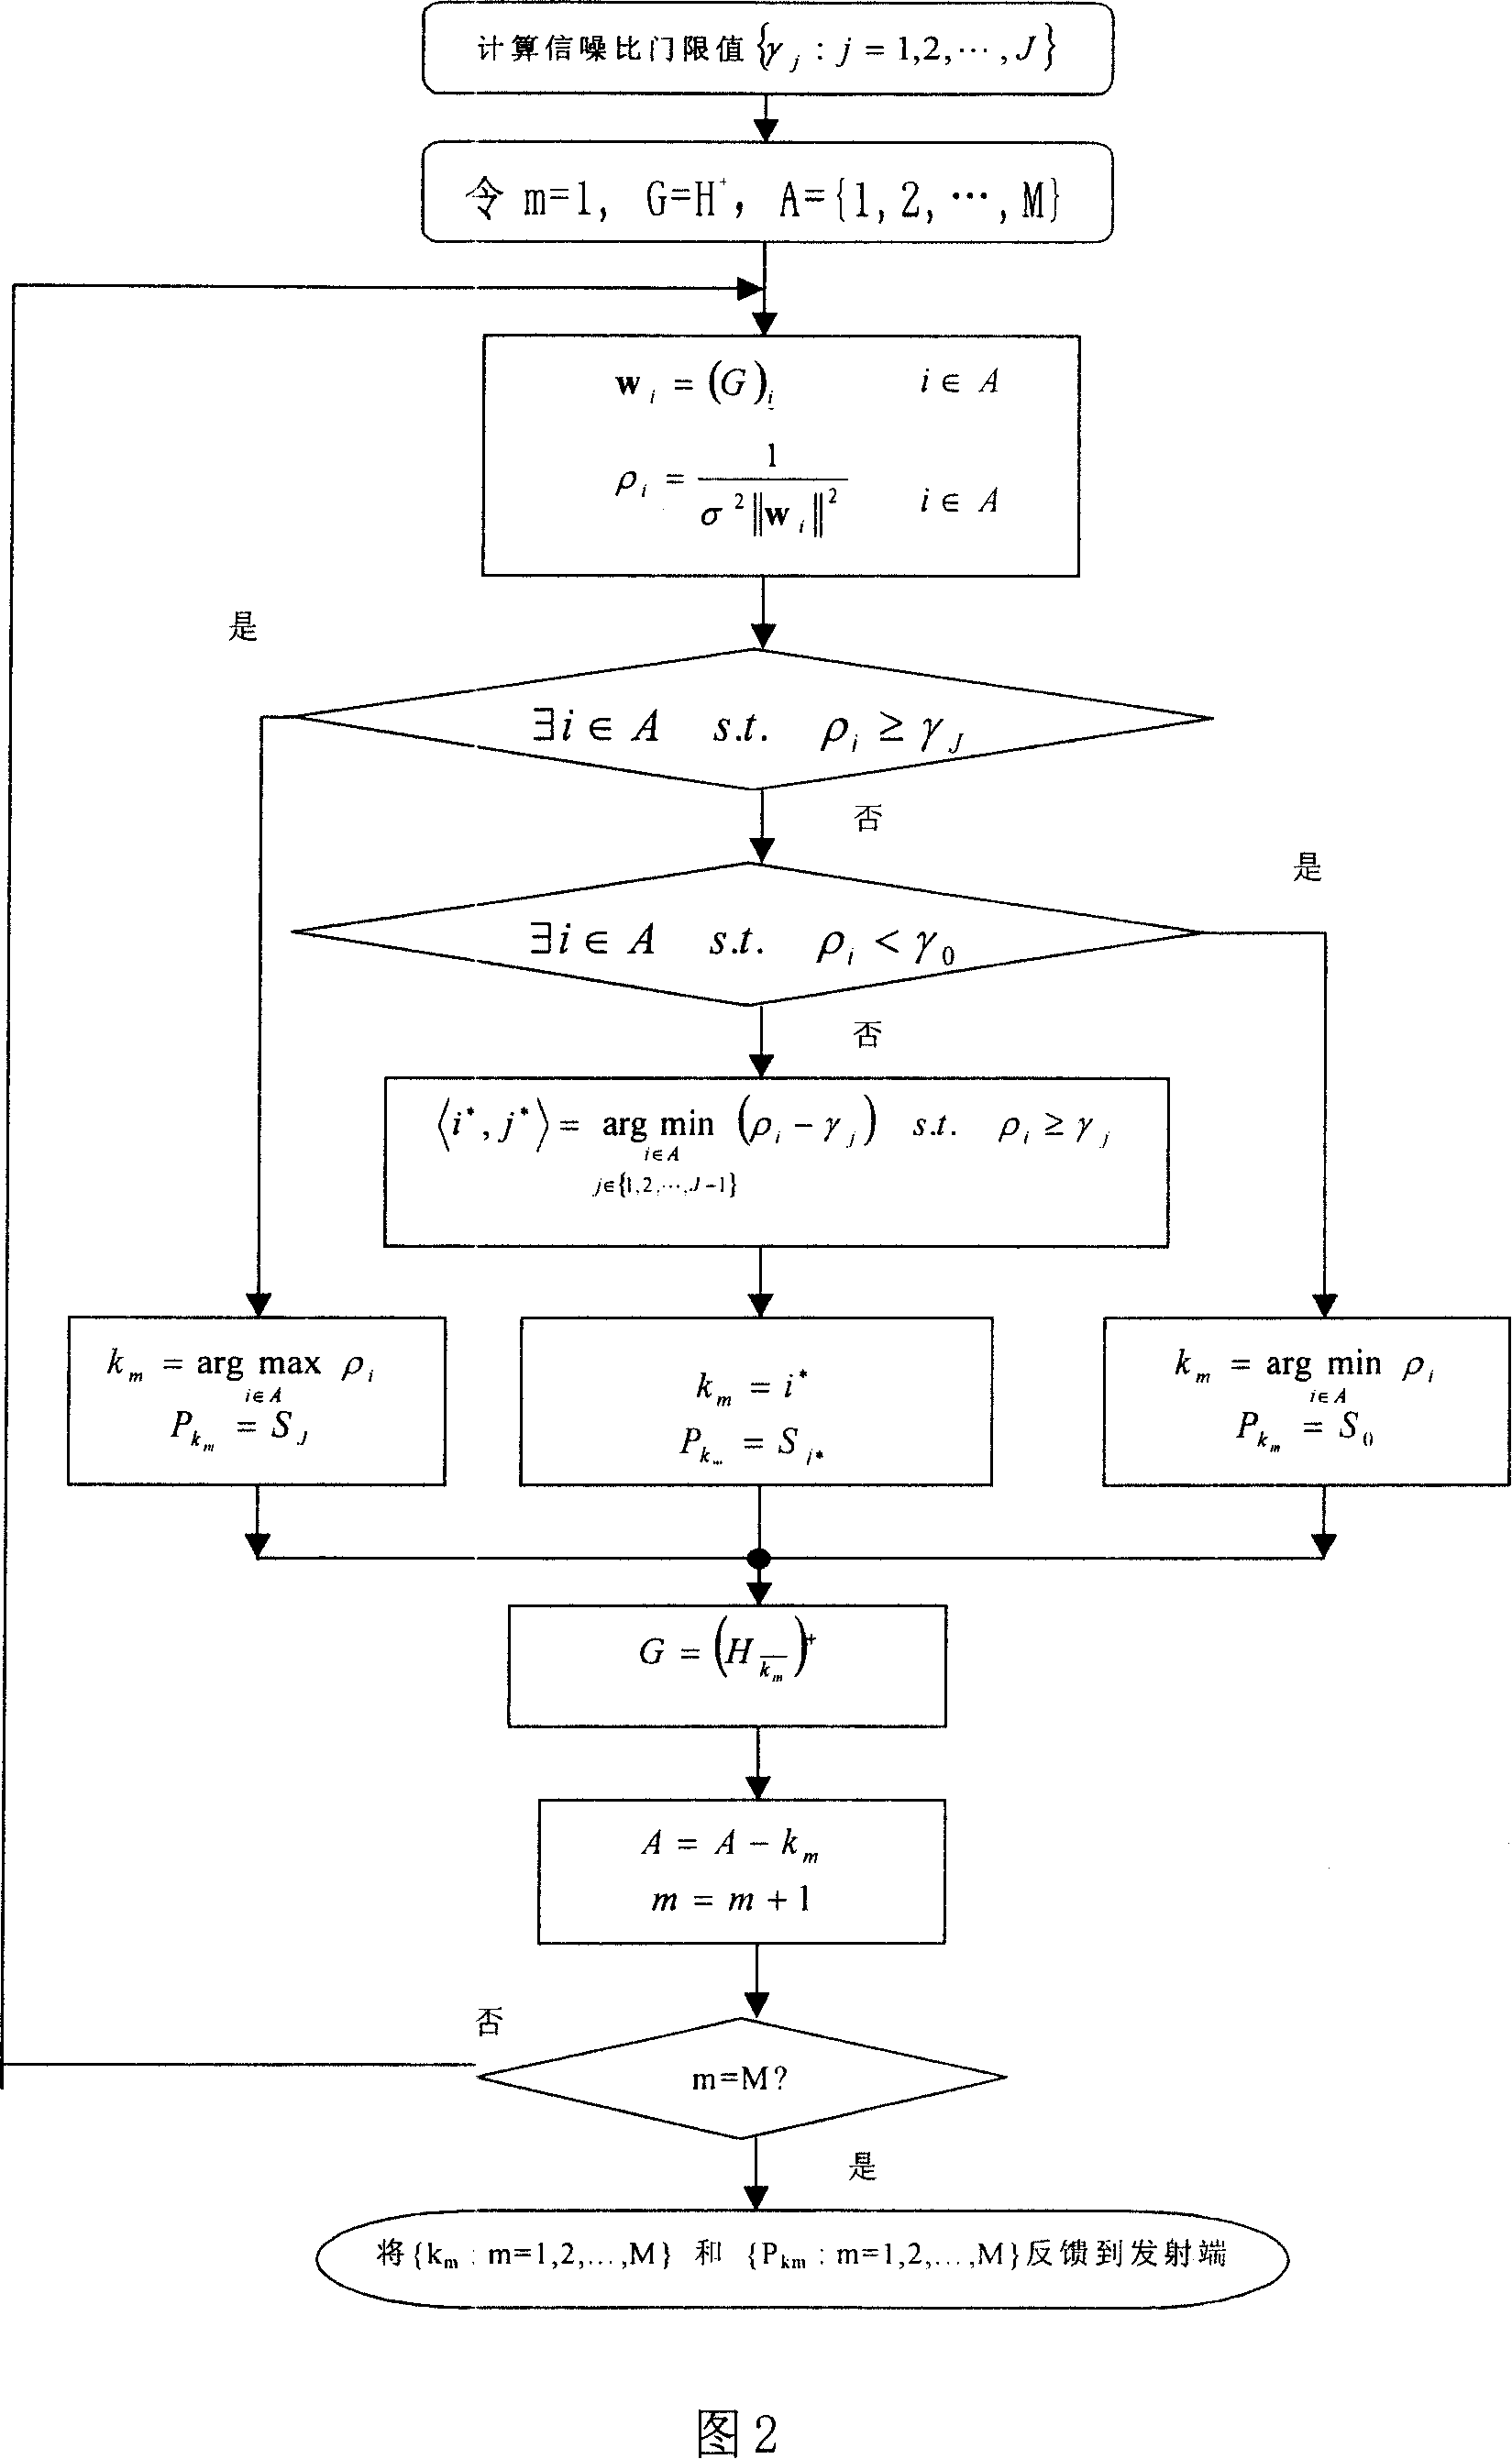 Receiving and detecting method of vertical layered space-time system based on self adaptive modulation